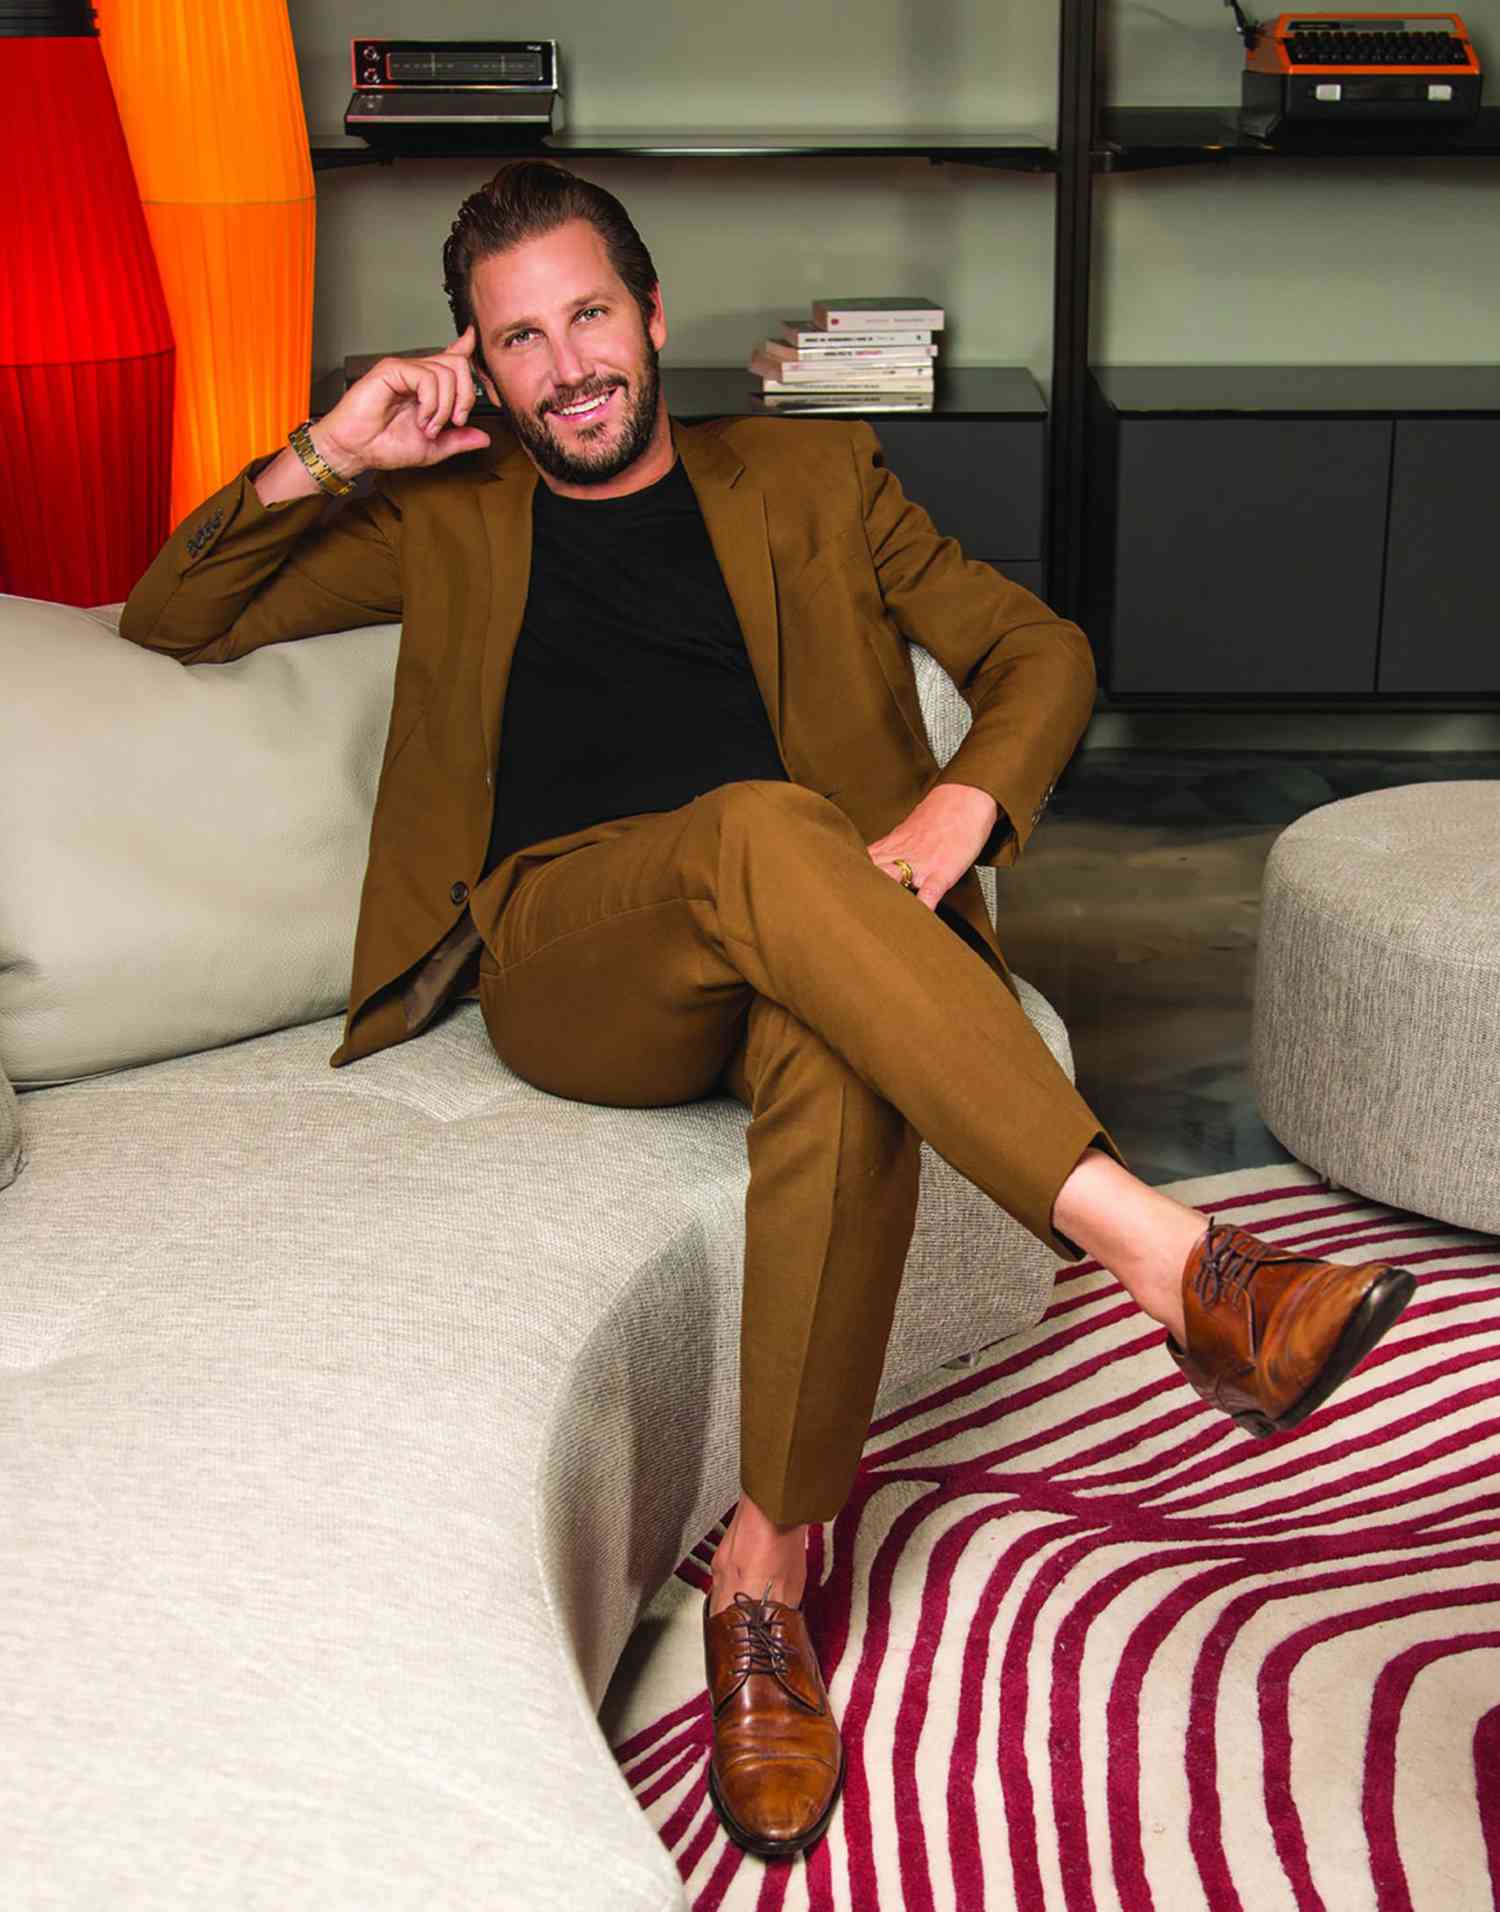 Actor Turned Hollywood's Go-To Realtor Branden Williams Shares Wild Tales of Celeb Real Estate